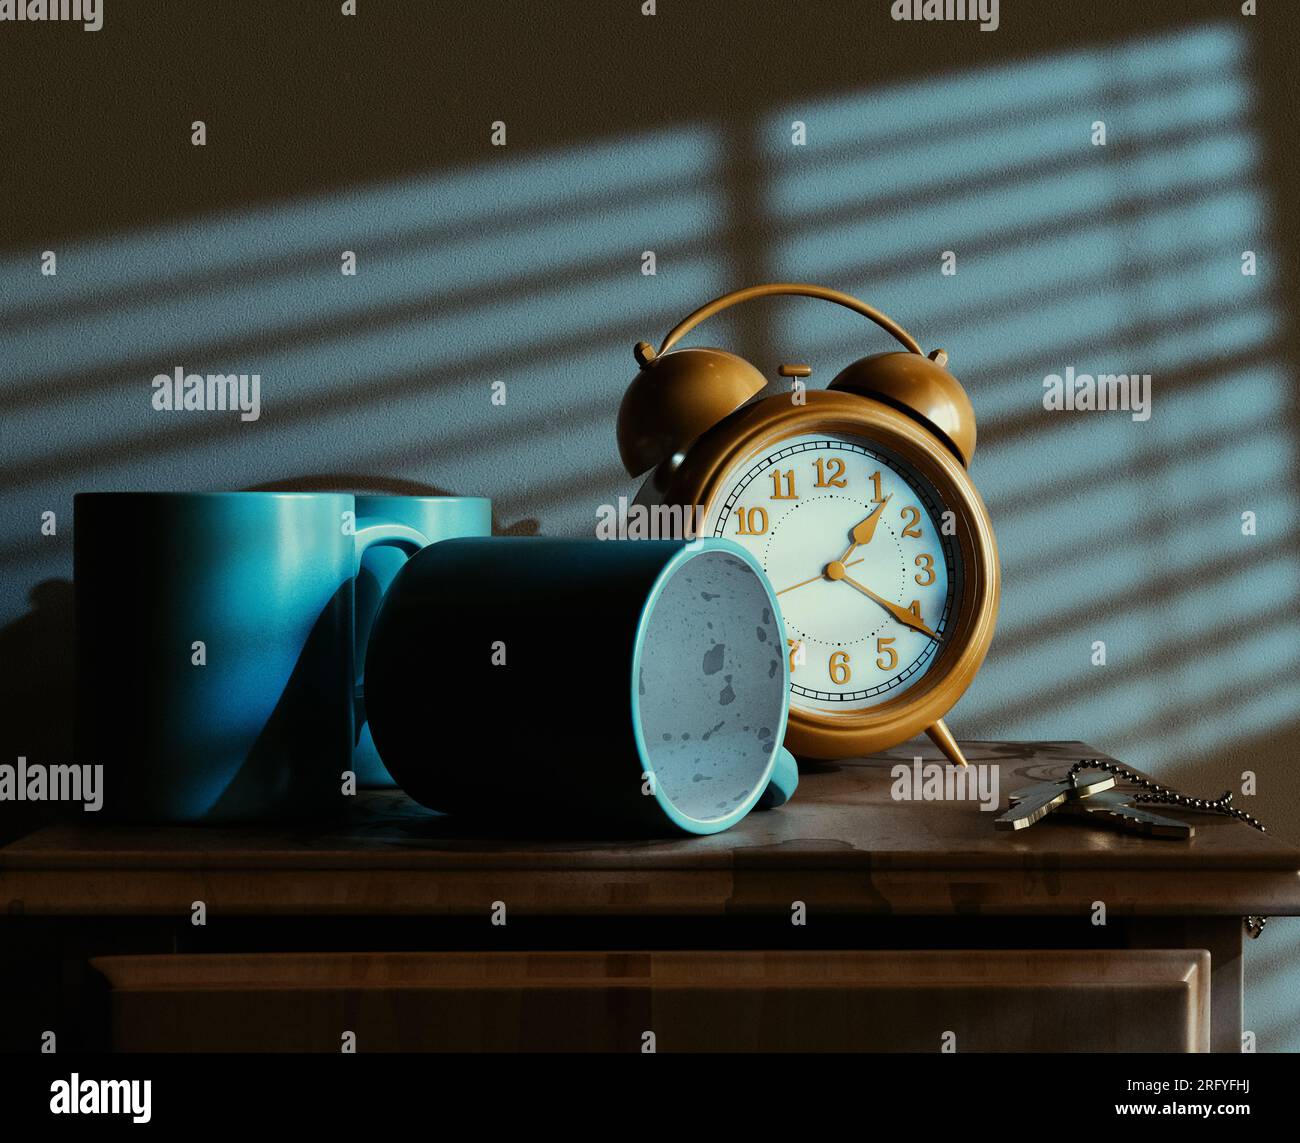 A concept scene showing a vintage alarm clock on a bed side table with dirty coffee mugs keys and and a stained top at night - 3D Render Stock Photo